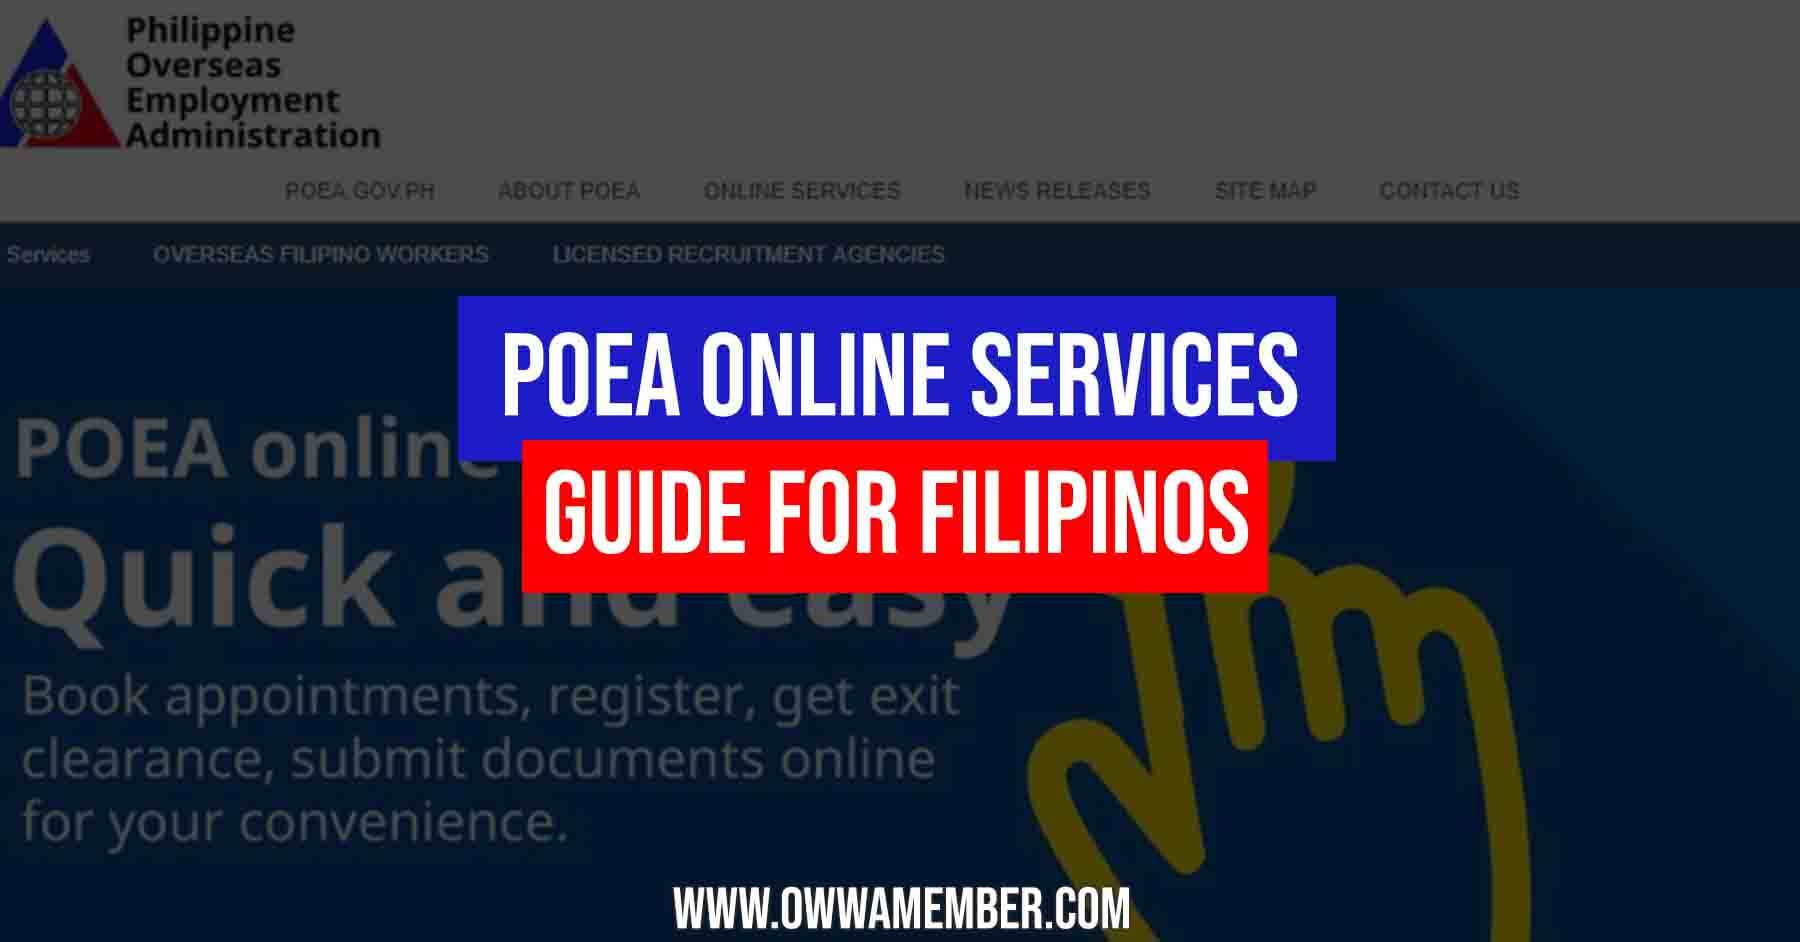 poeaonlineservices website portal